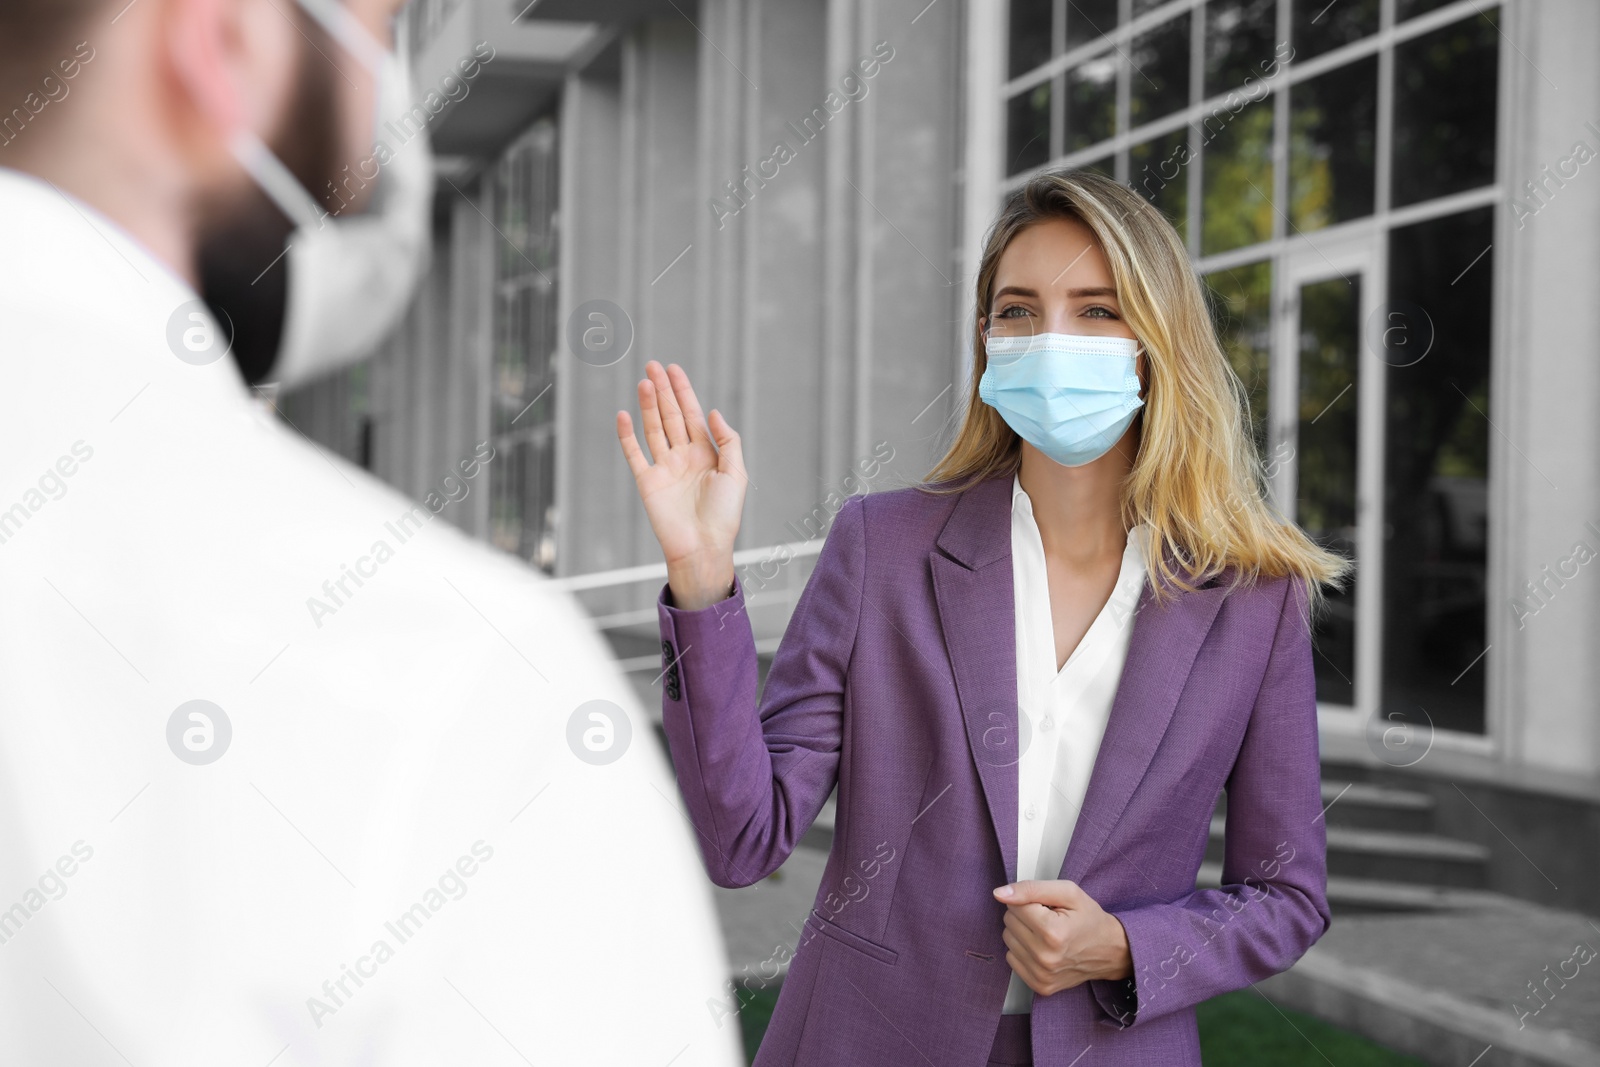 Photo of Woman in protective face mask saying hello outdoors. Keeping social distance during coronavirus pandemic